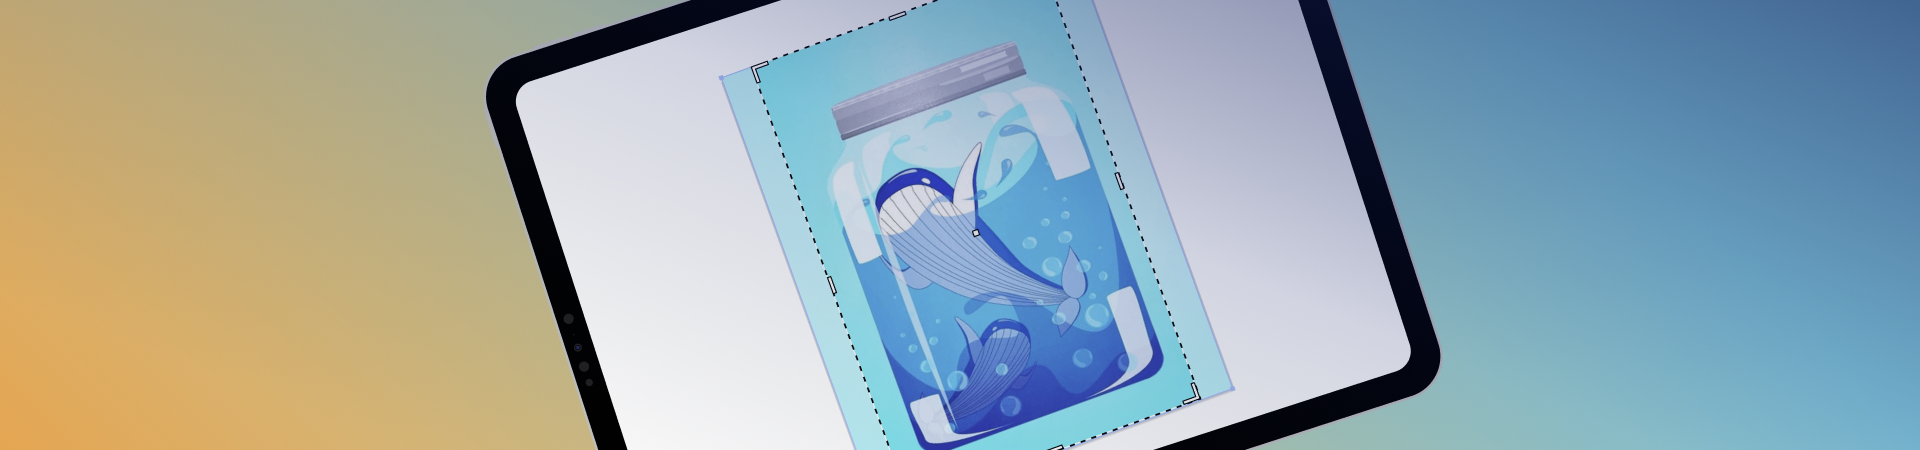 iPad screen showing a whale in a jar 